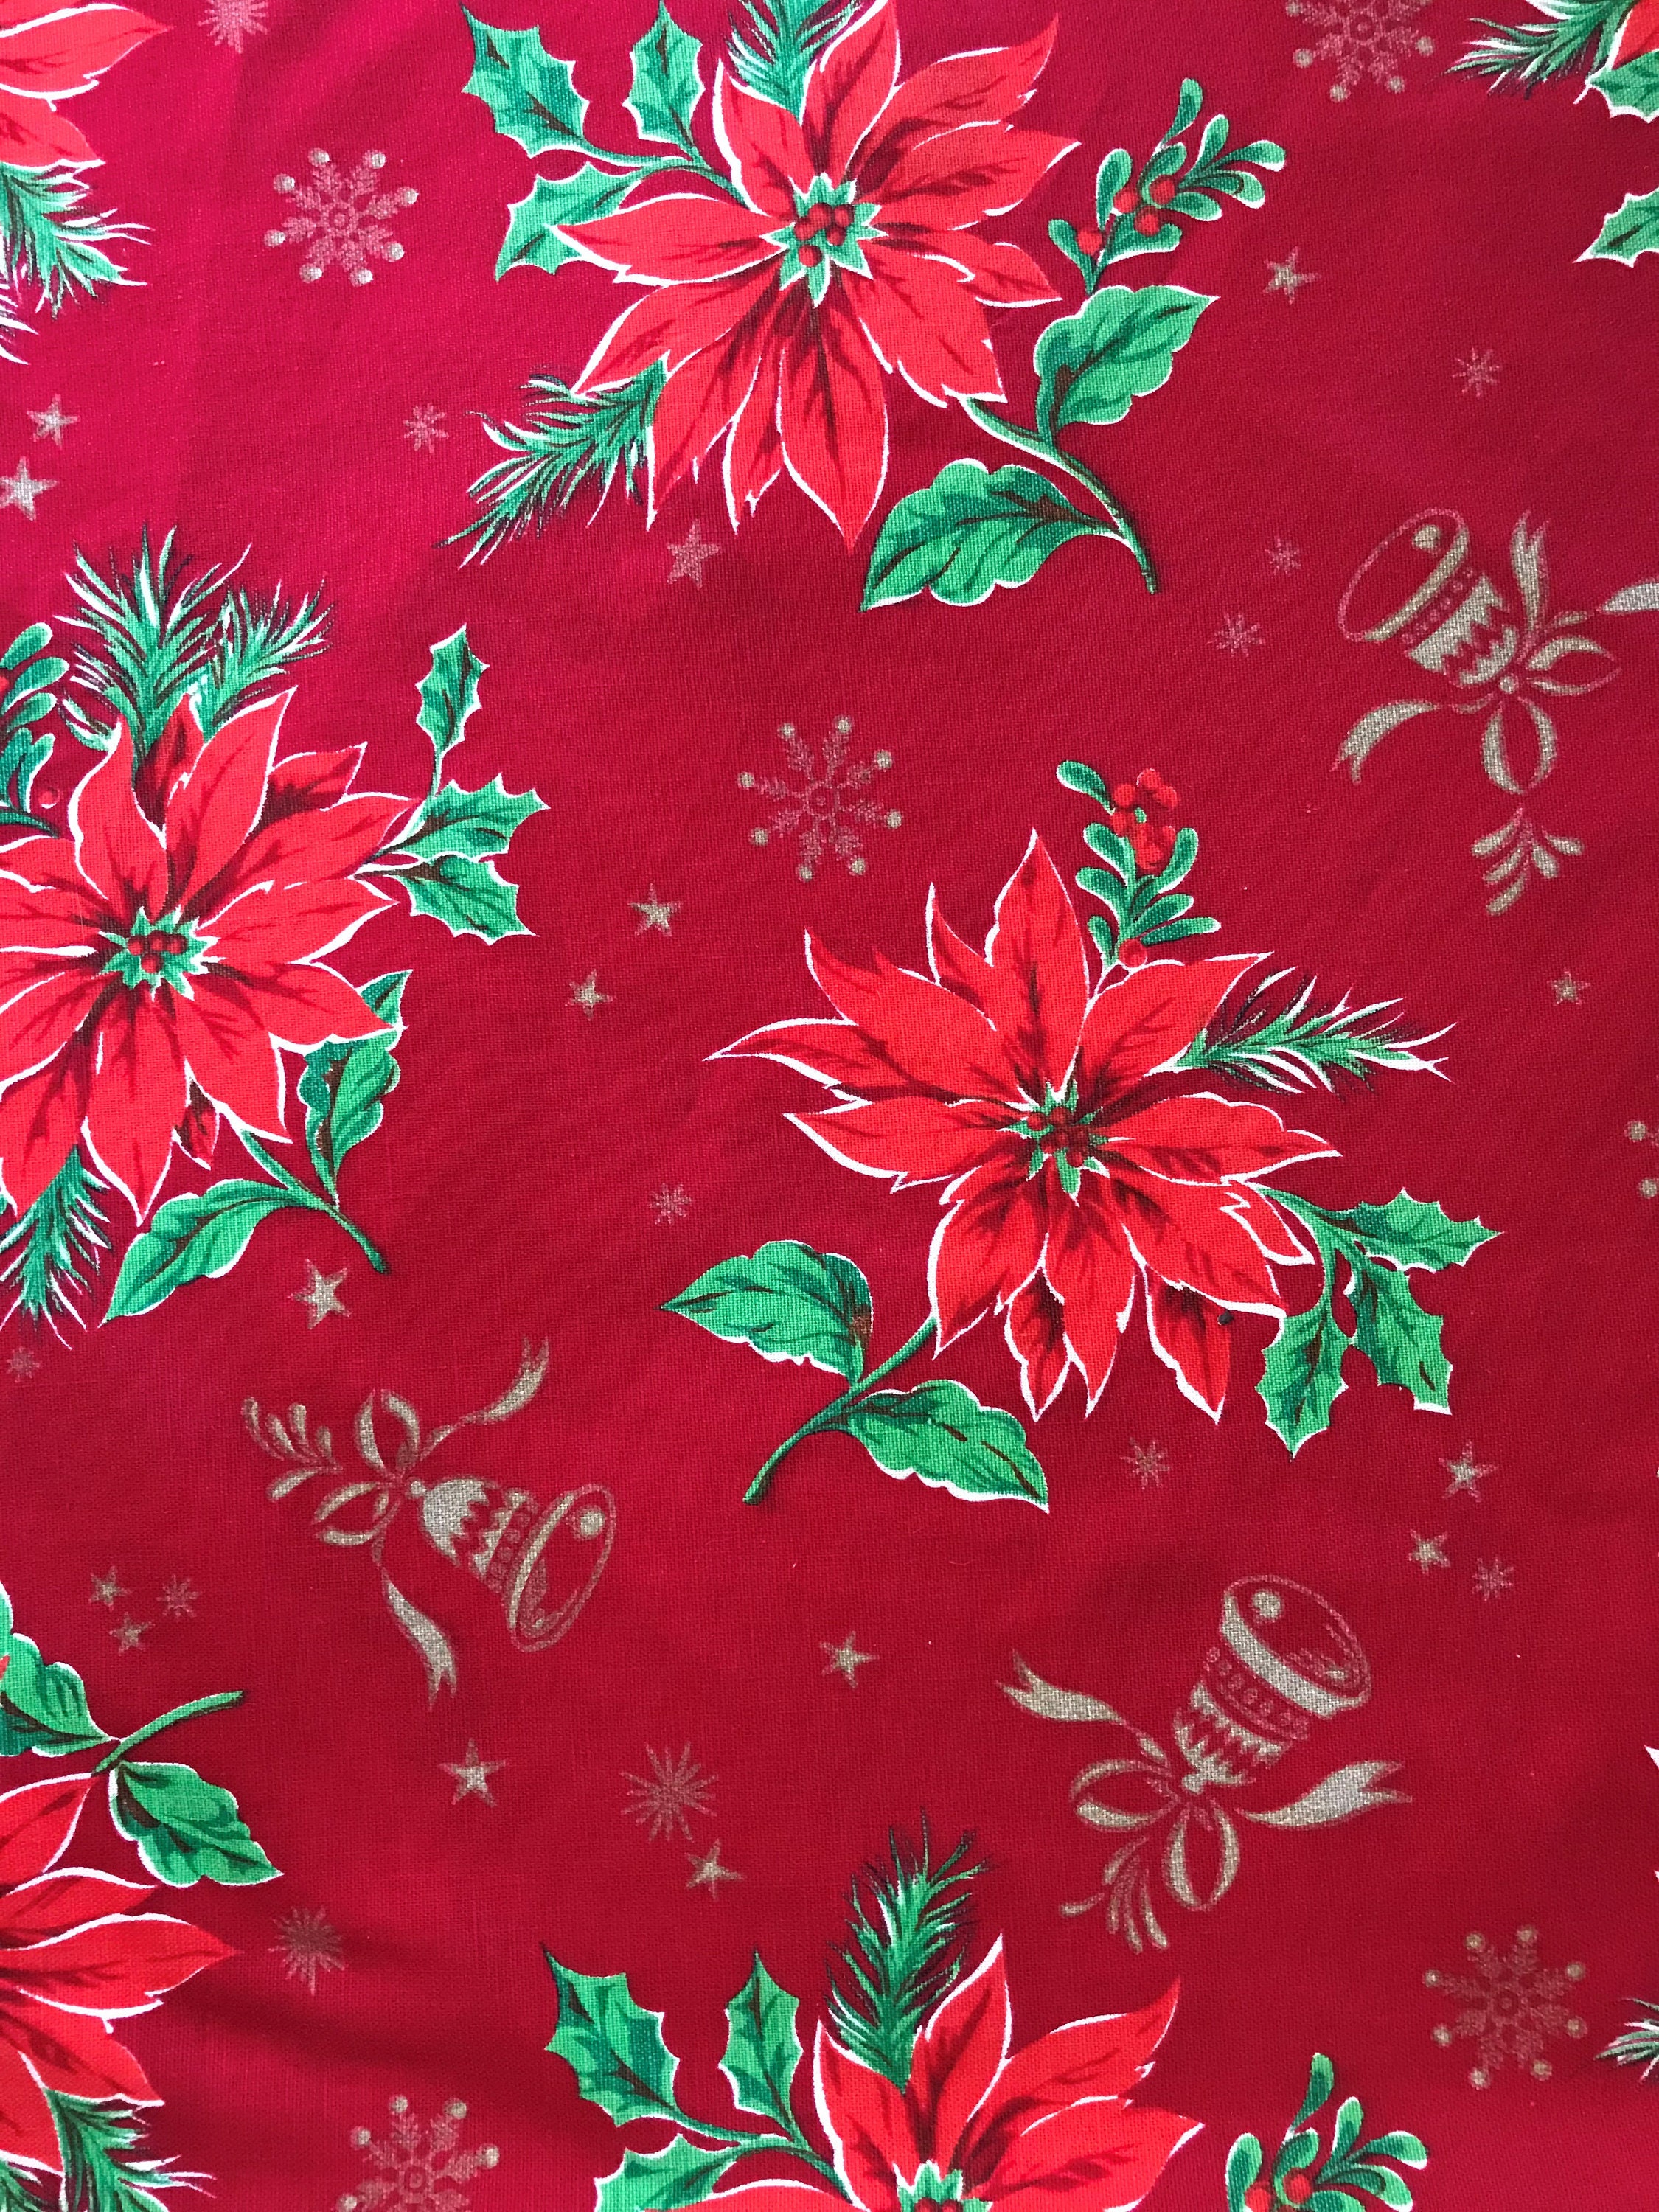 Vintage Round Christmas Tablecloth - Etsy